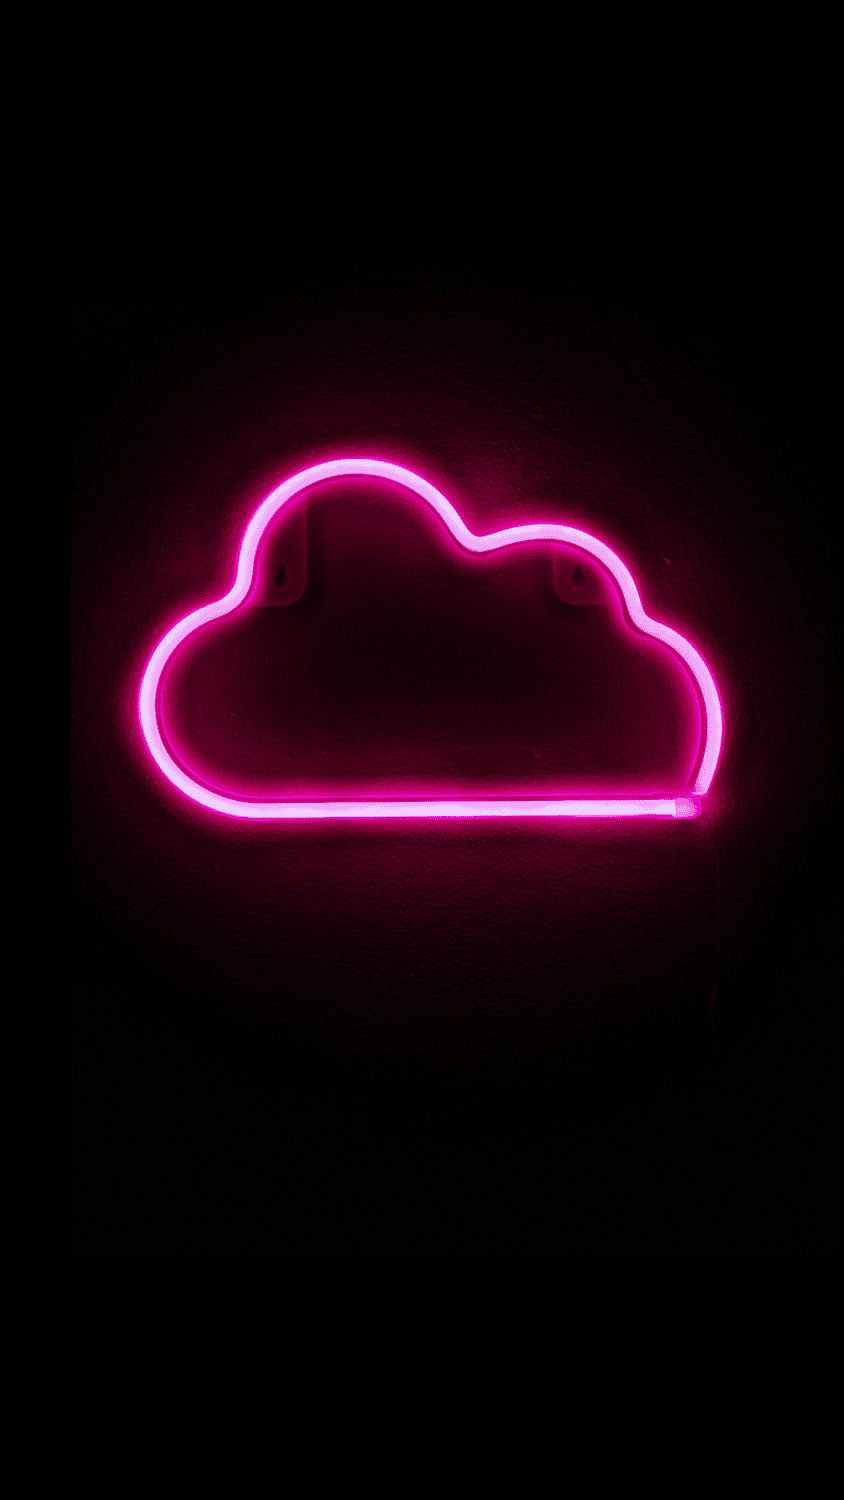 A pink neon sign in the shape of a cloud - Neon pink, hot pink, cute pink, pink, light pink